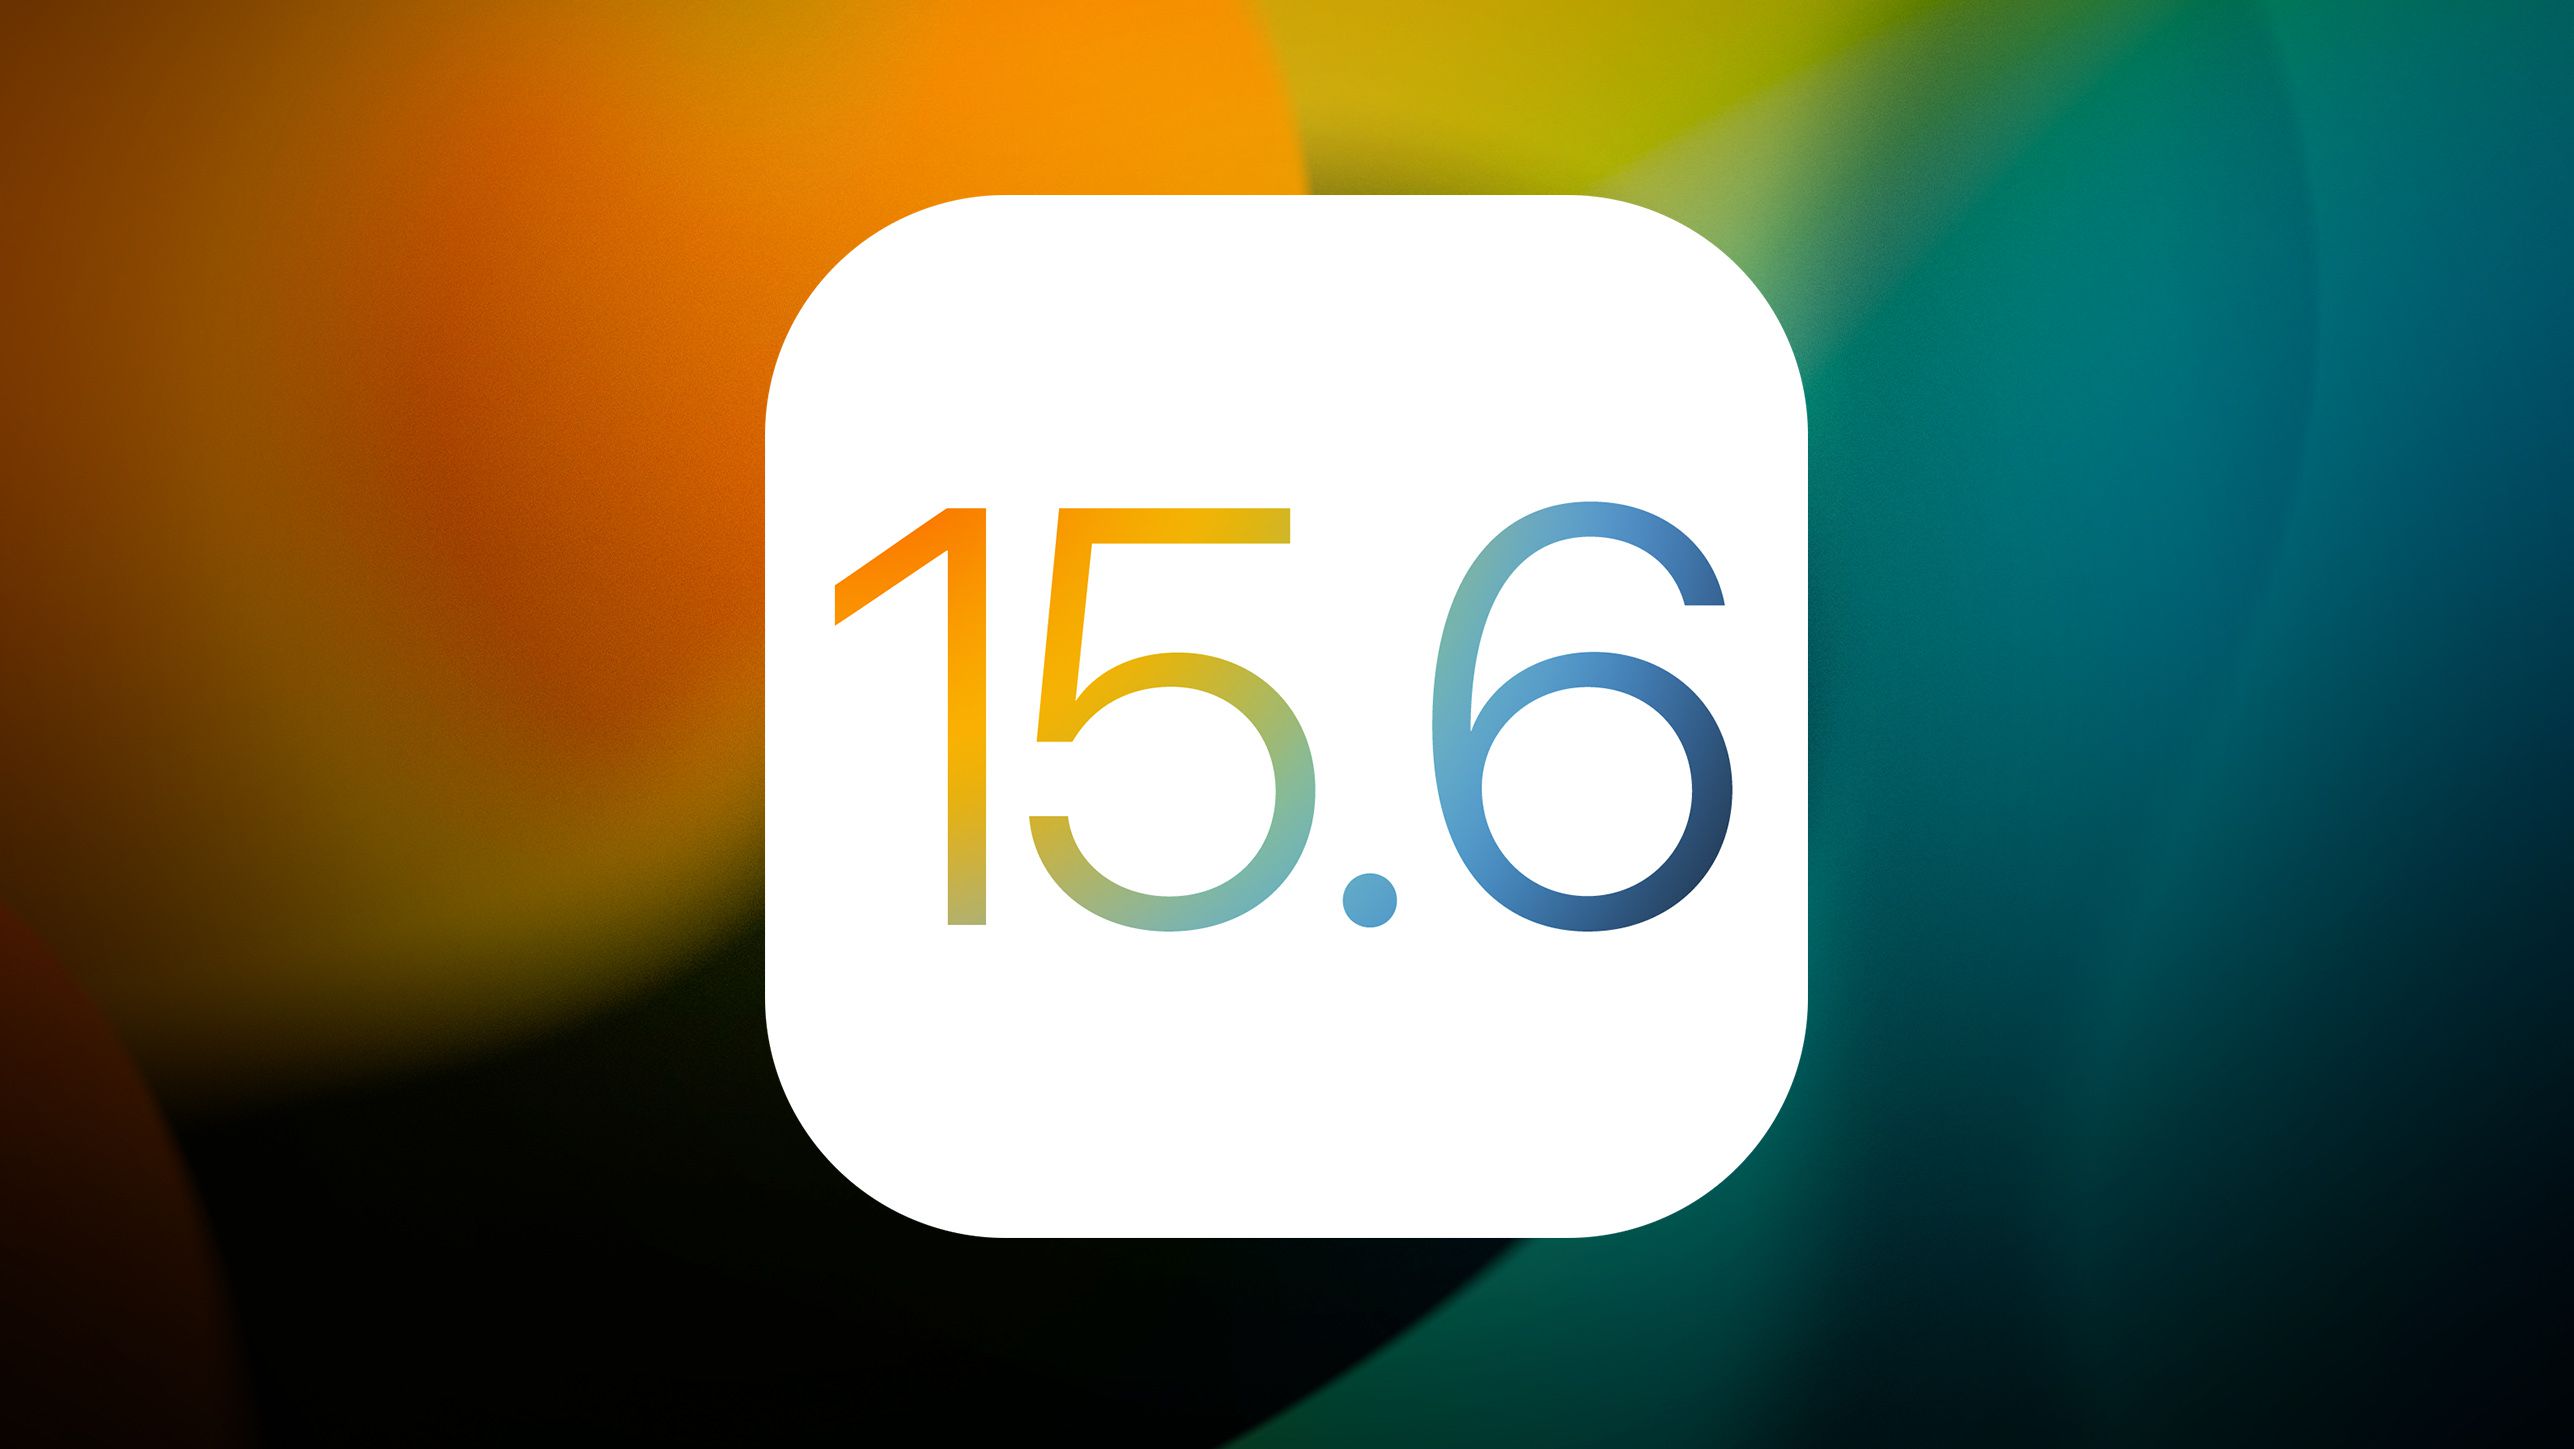 Apple Seeds First Public Betas of iOS 15.6 and iPadOS 15.6